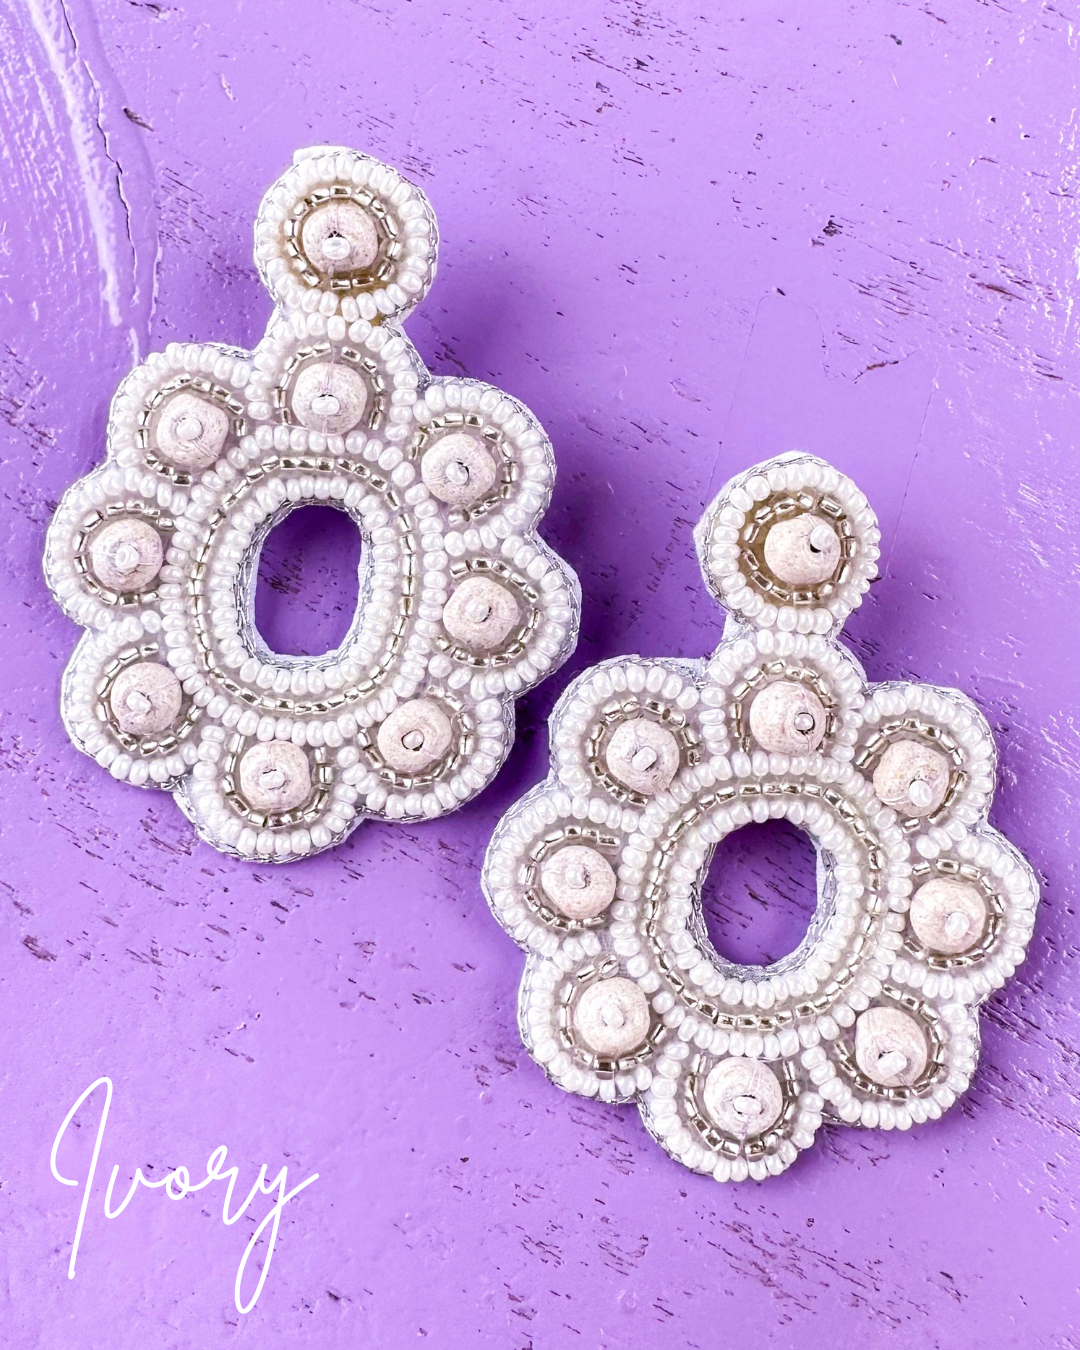 Every Little Thing Earrings-Earrings-Golden Stella-The Village Shoppe, Women’s Fashion Boutique, Shop Online and In Store - Located in Muscle Shoals, AL.